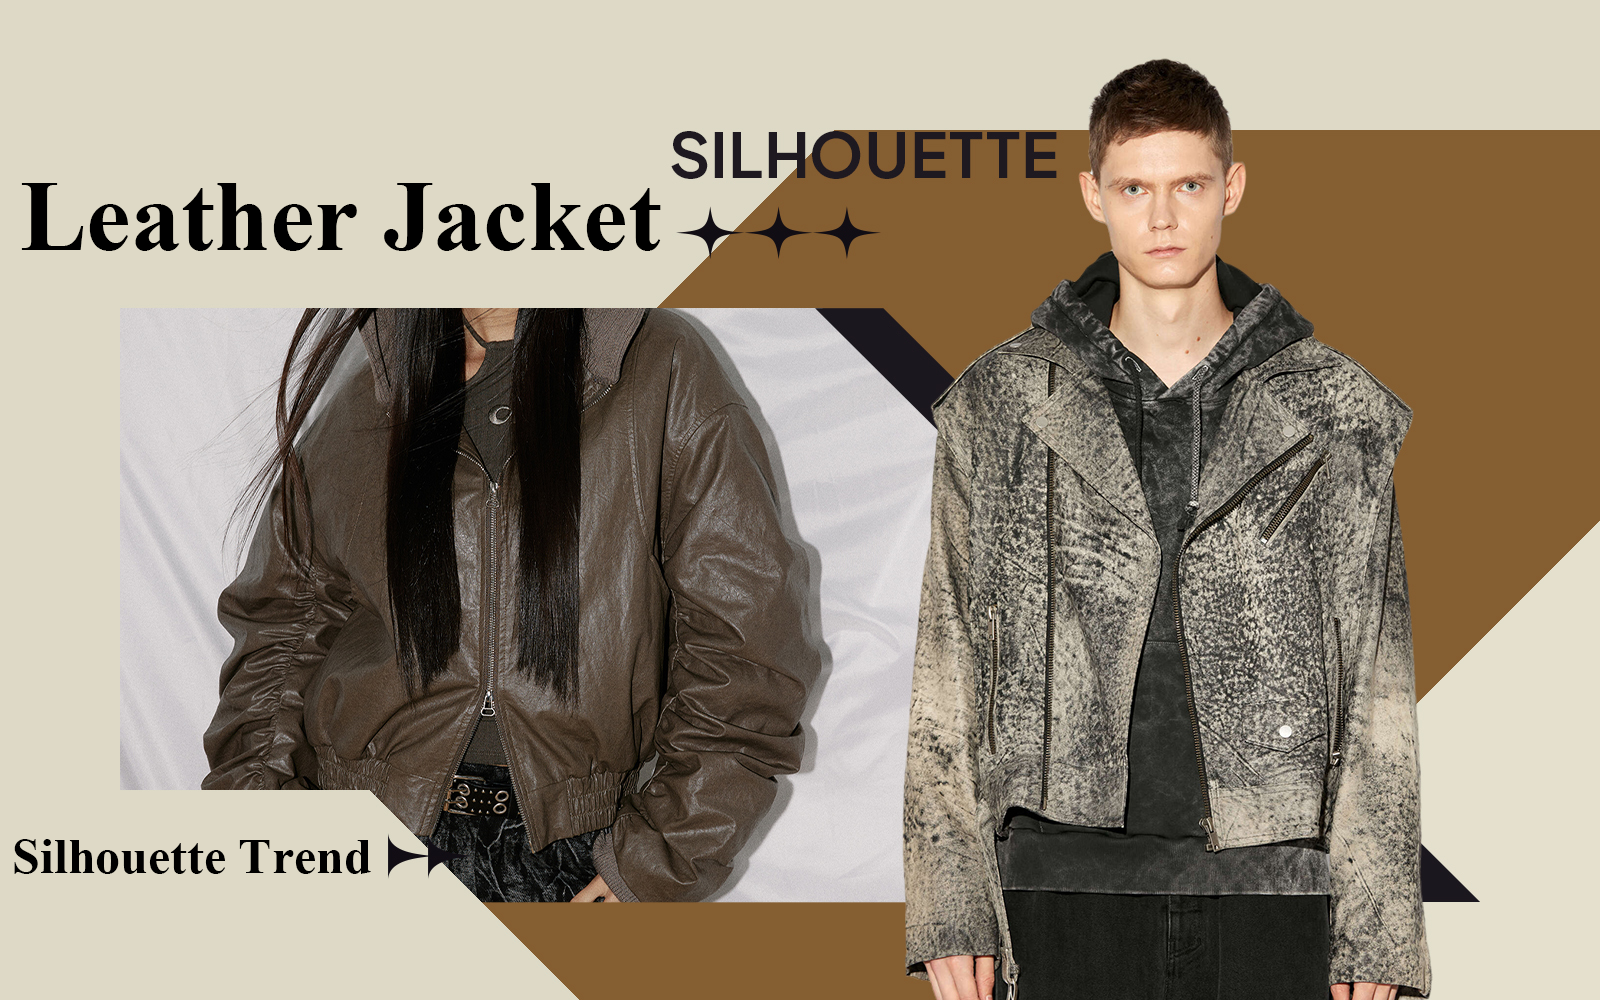 The Silhouette Trend for Men's & Women's Leather Jacket